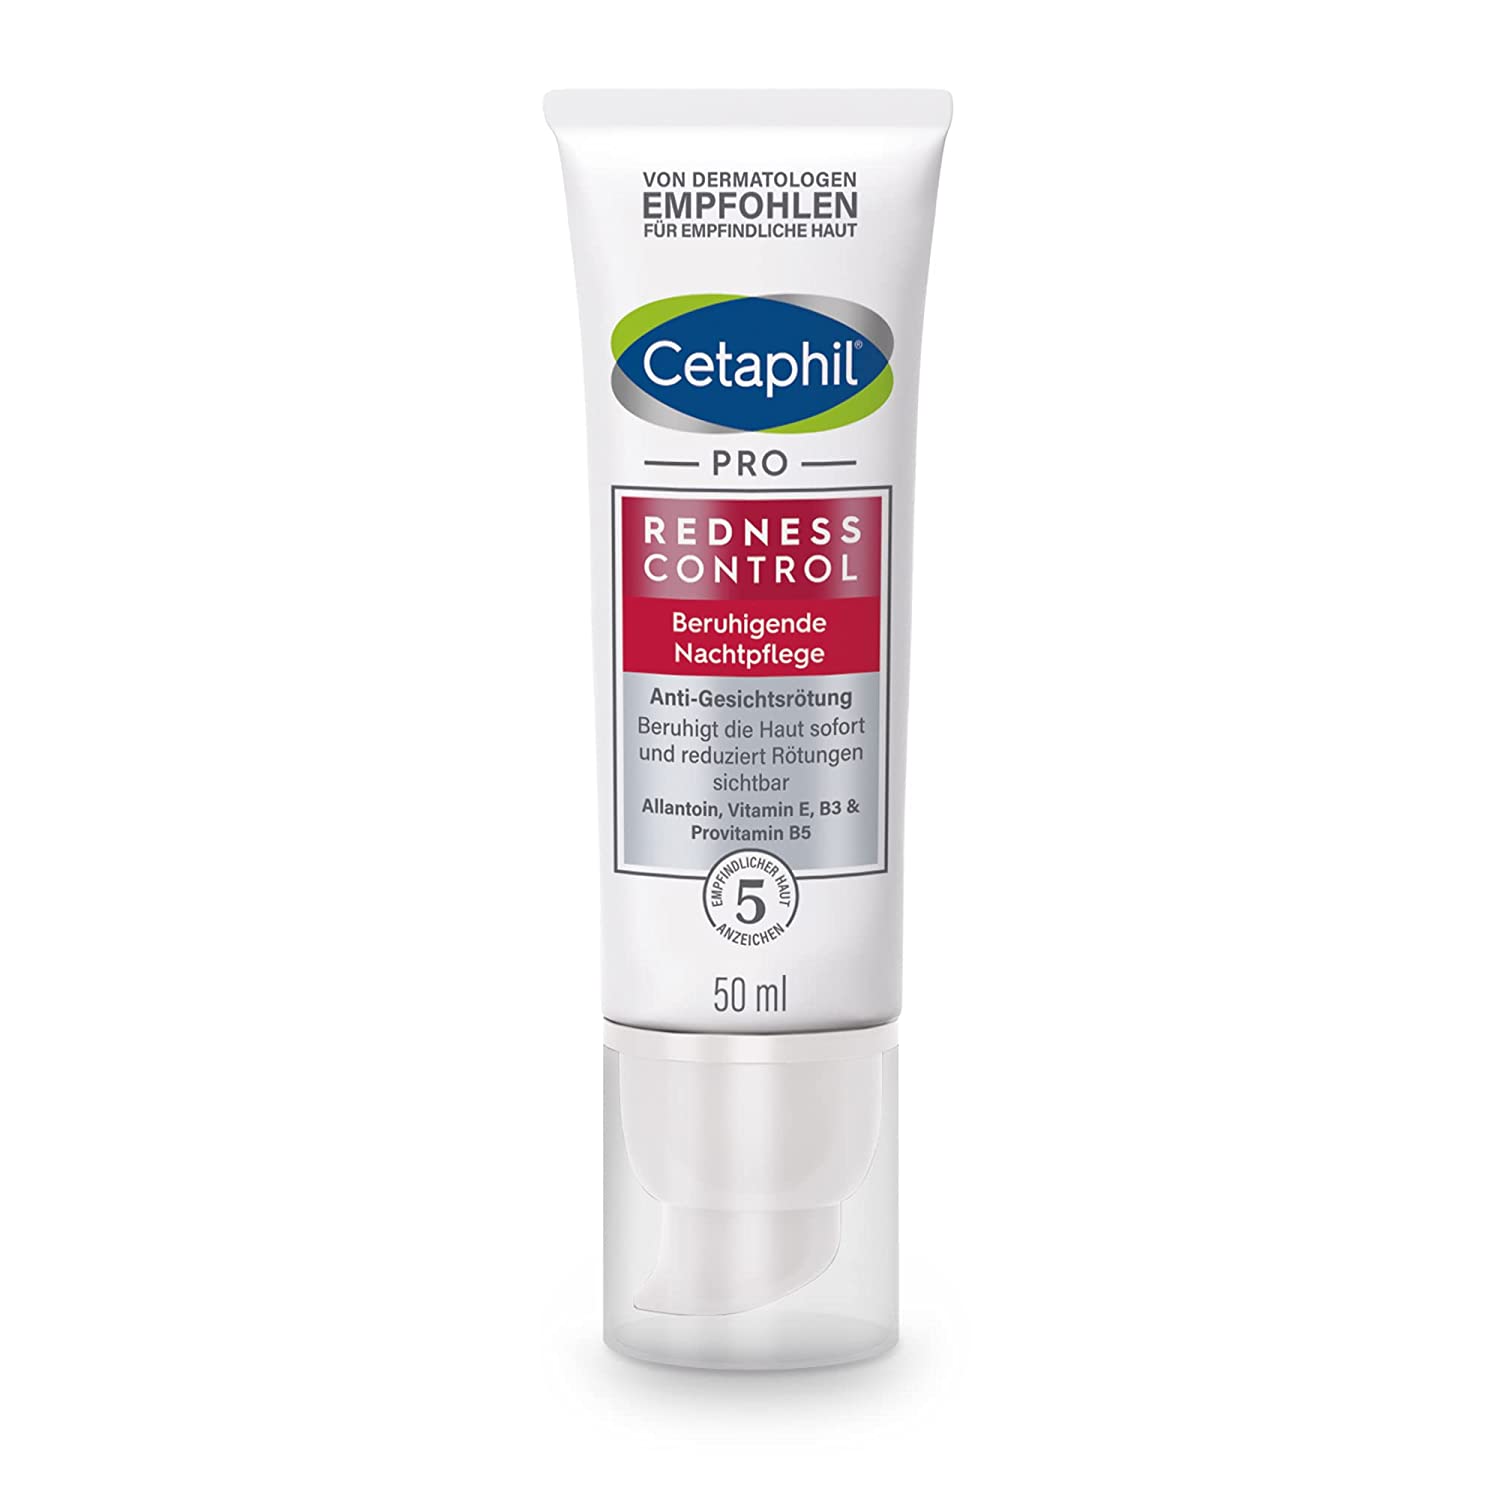 CETAPHIL Pro RednessControl Soothing Night Cream 50 ml for Redness Prone Skin Instantly Soothes the Skin Reduces Redness Visibly Overnight, Fragranceless Clinically Tested